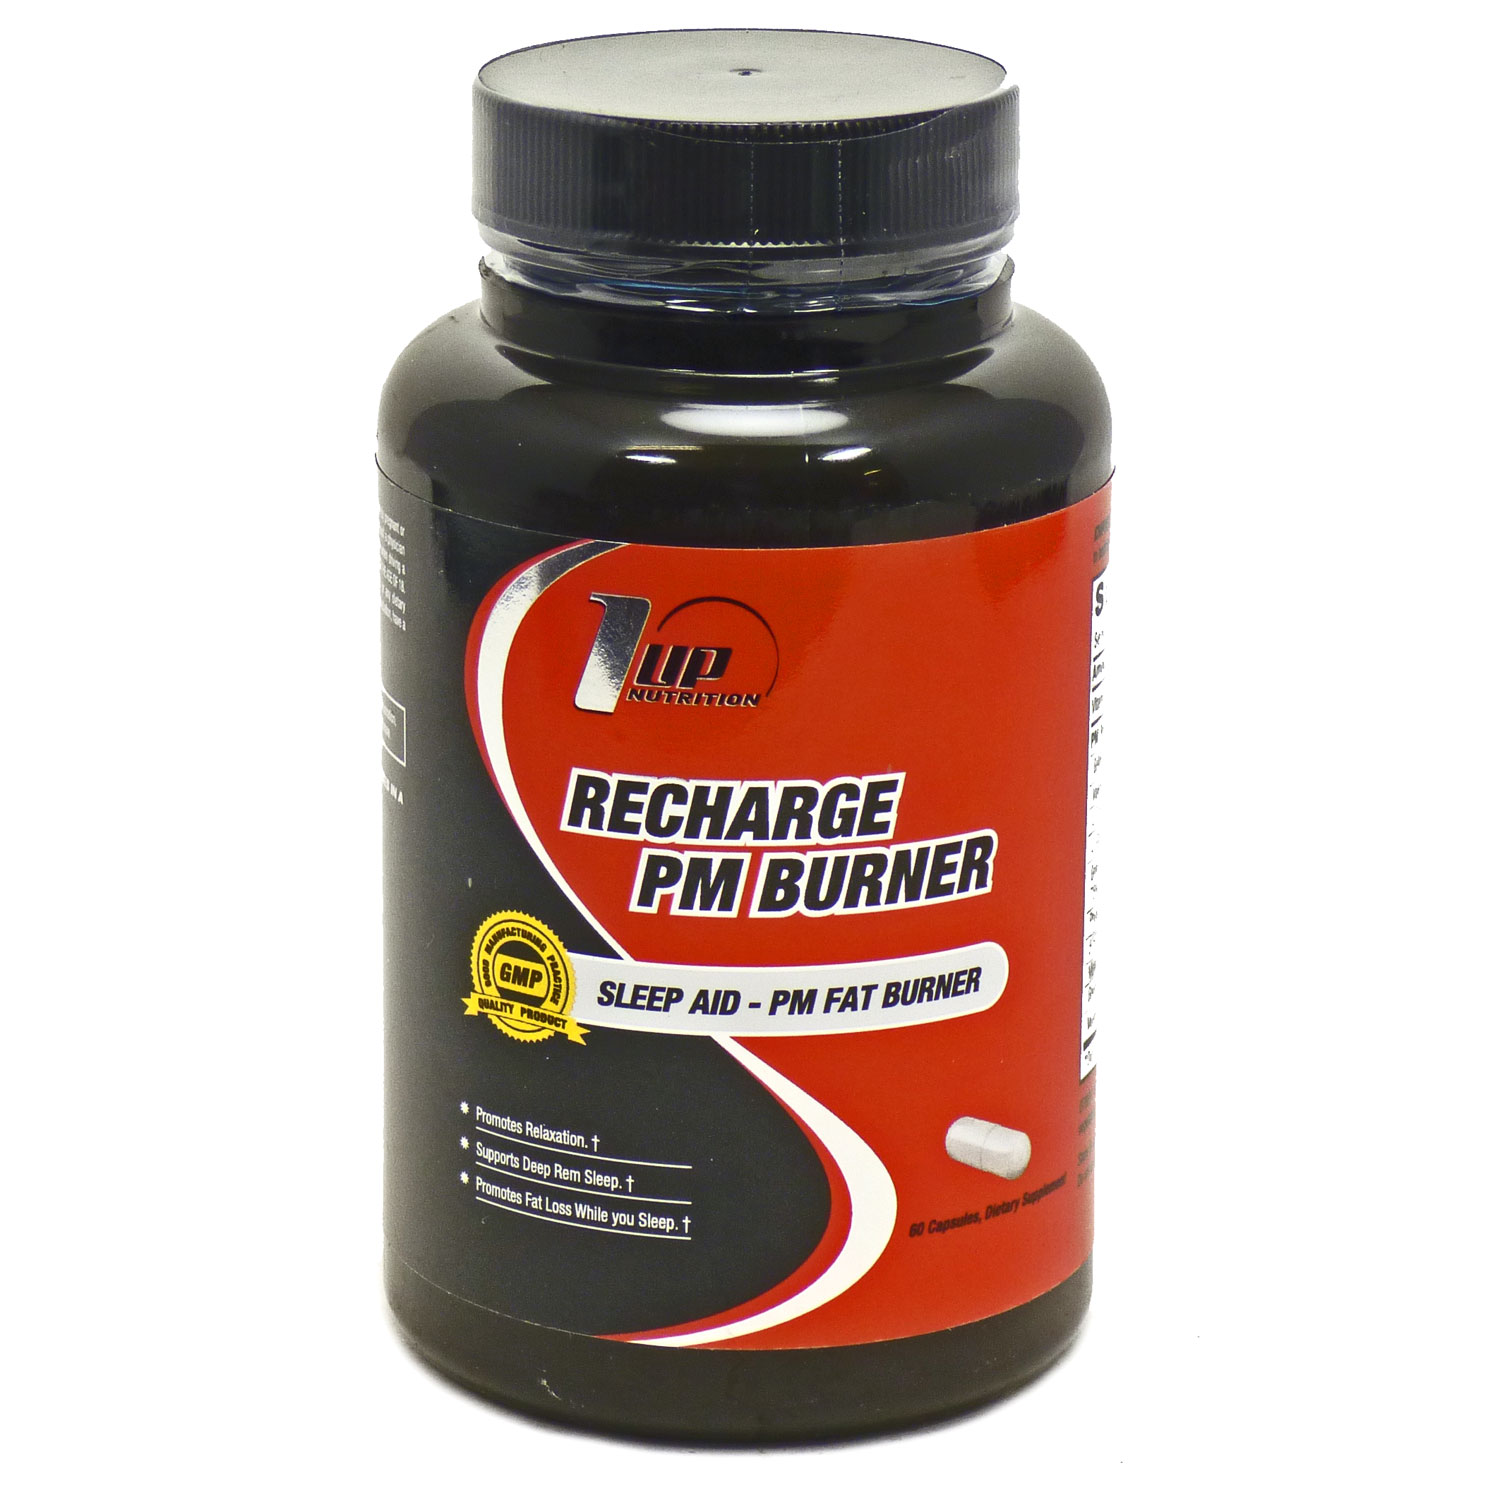 Recharge PM Burner by 1up Nutrition - 60 Capsules ...